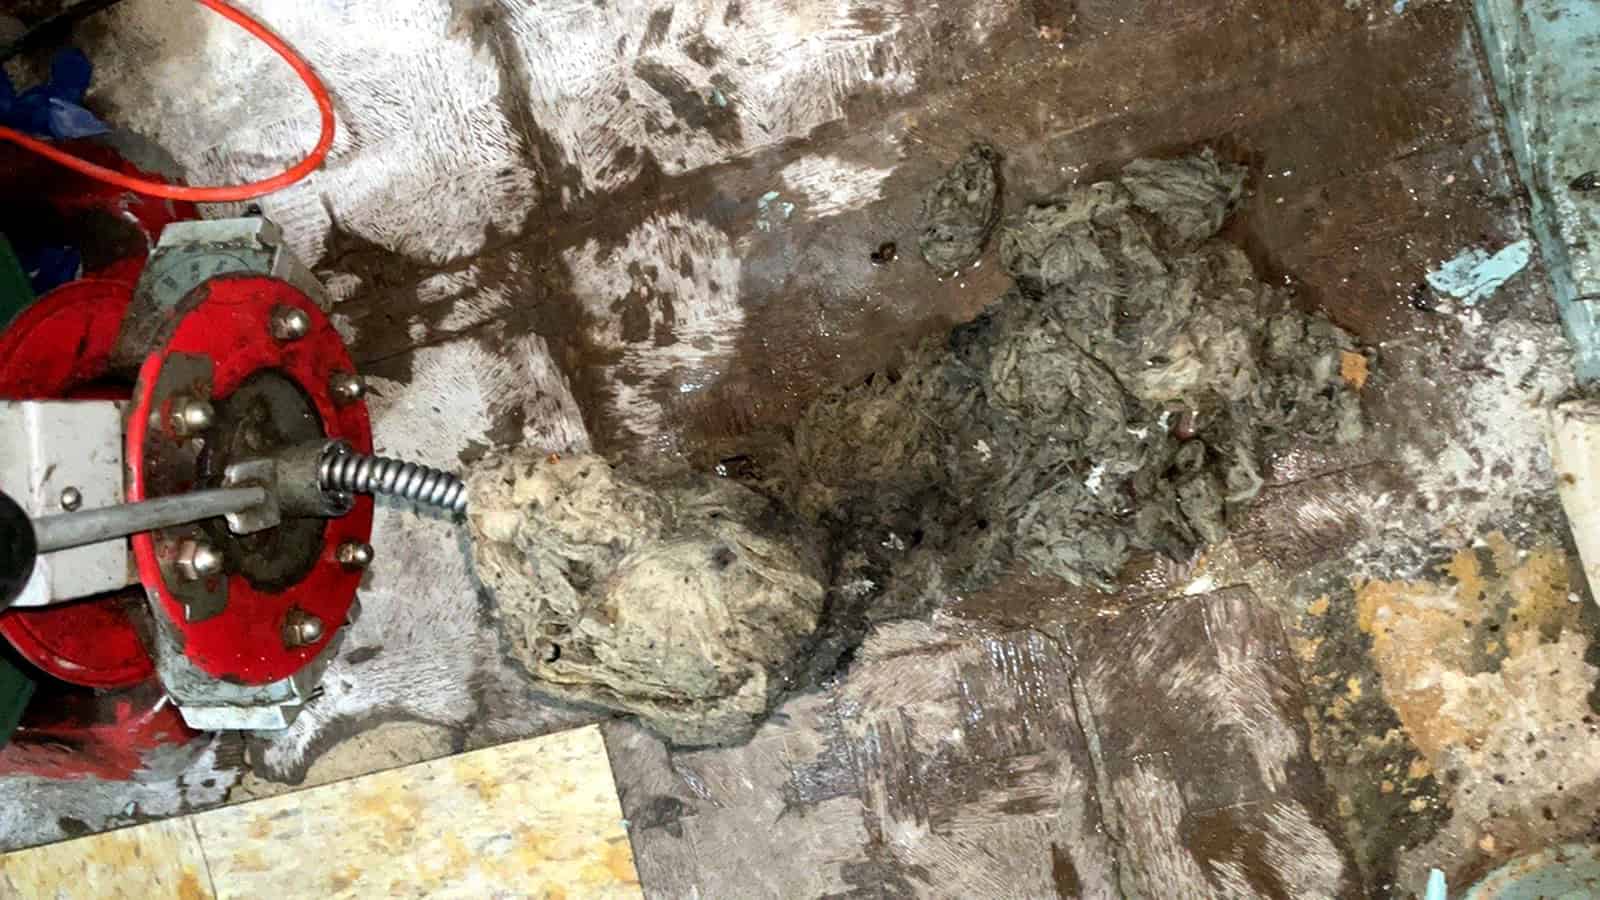 Sewer clog of flushable wipes, that really are not flushable.